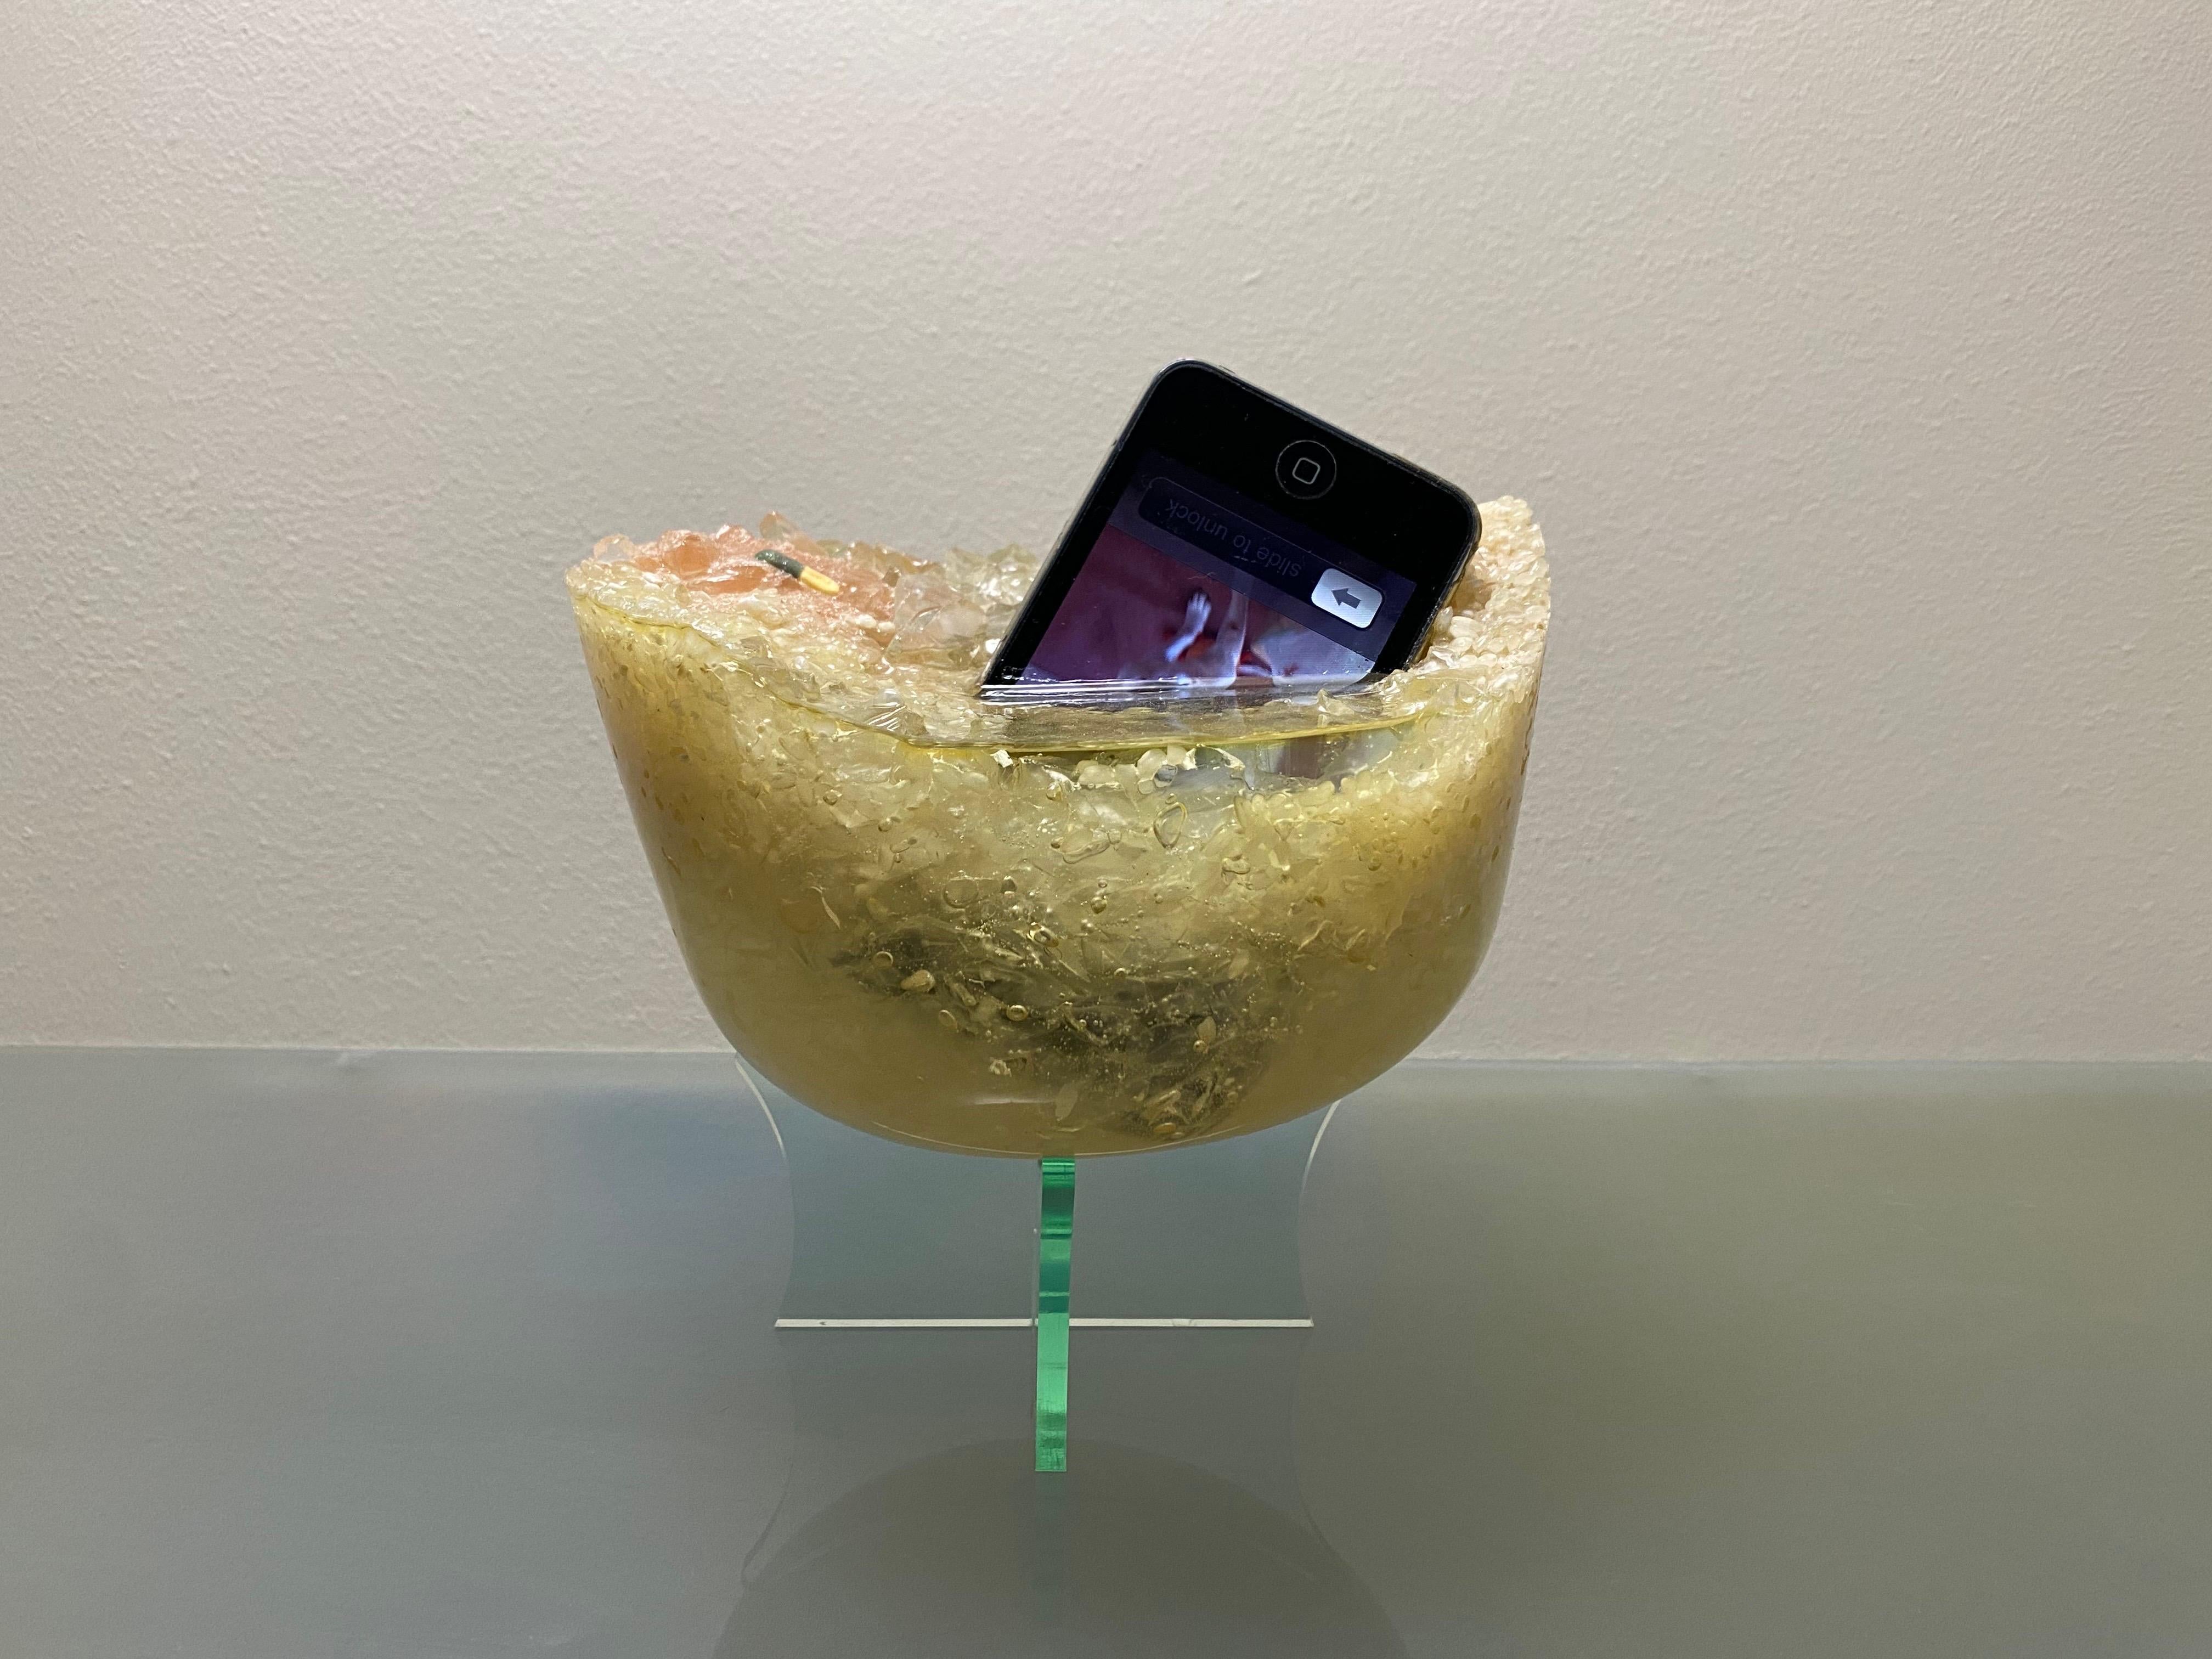 Banquet IV-Time Capsule-ipod2008-Resin Casting-UK Awarded Conceptual Artist  For Sale 9